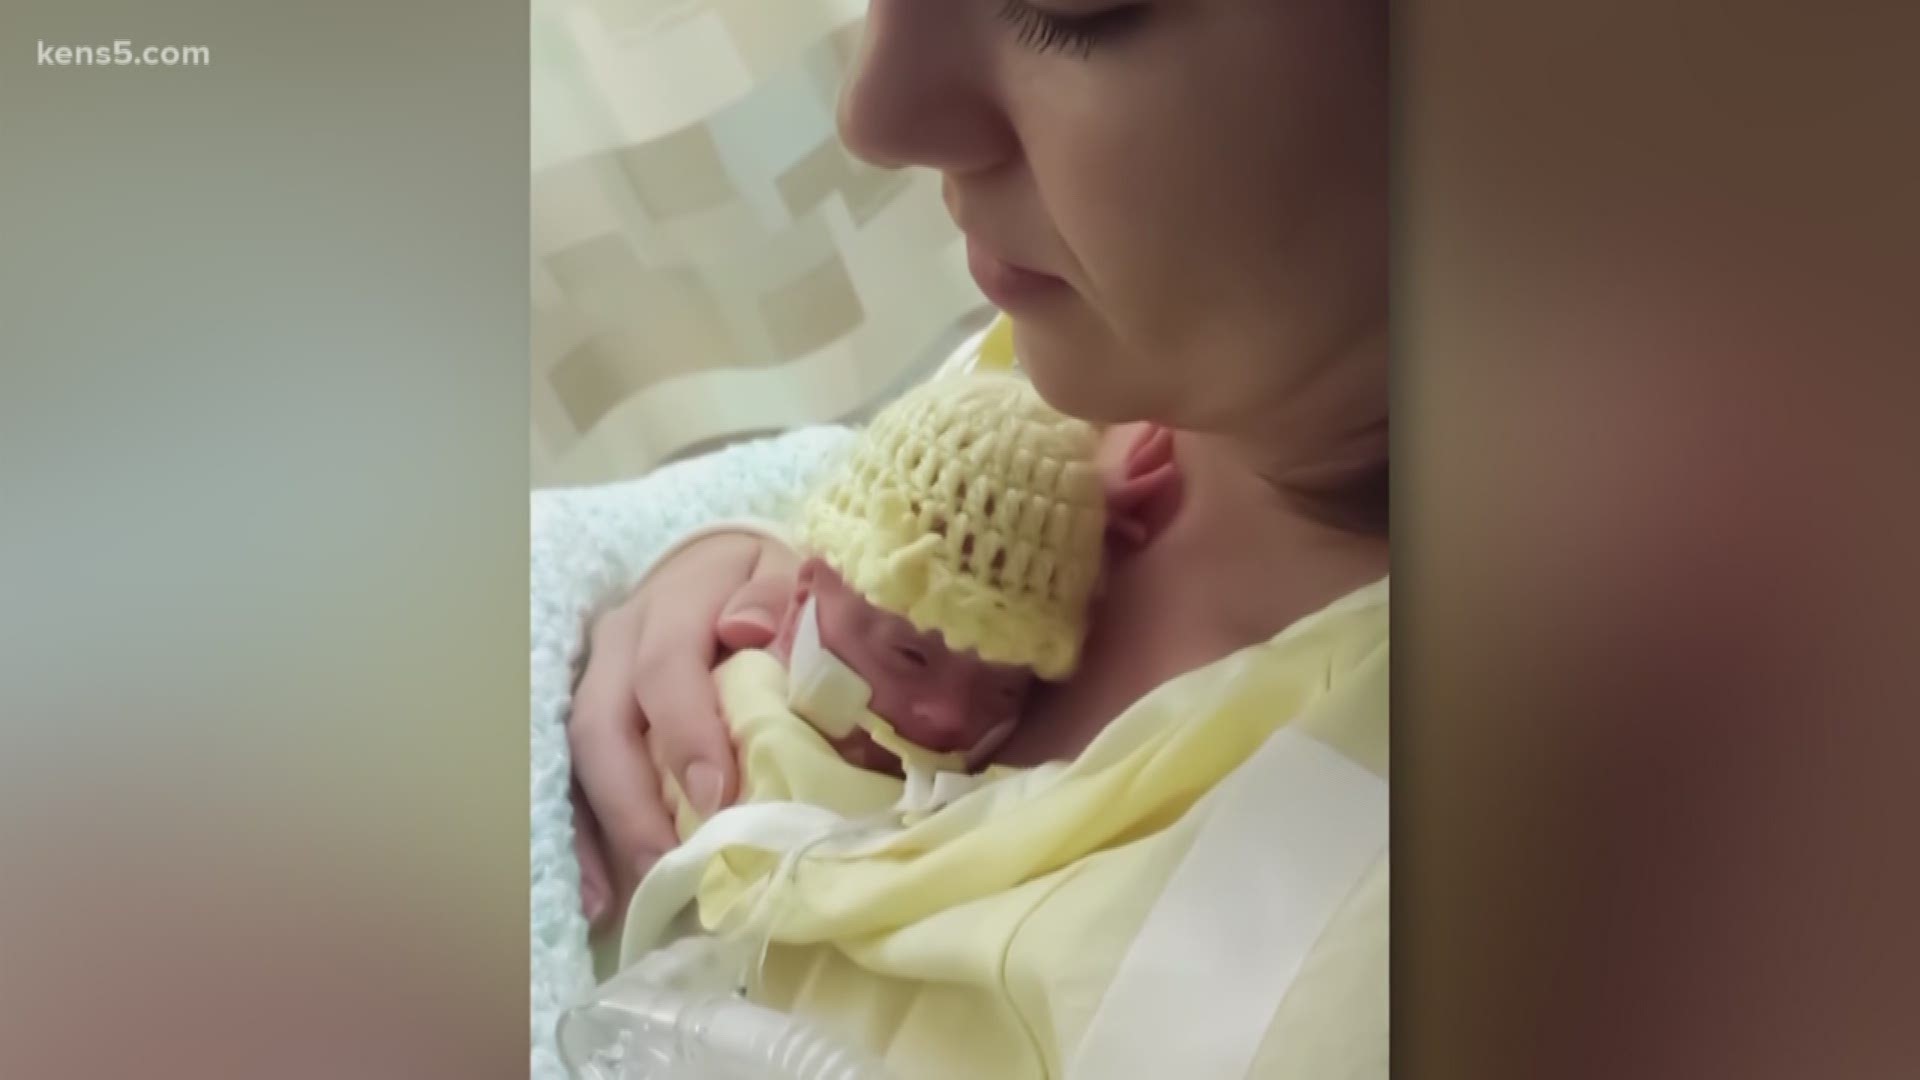 Her mother calls her a rock star. On July 11, 2014, Lyla was born at just 21 weeks, and a local doctor make the decision to give her a fighting chance.